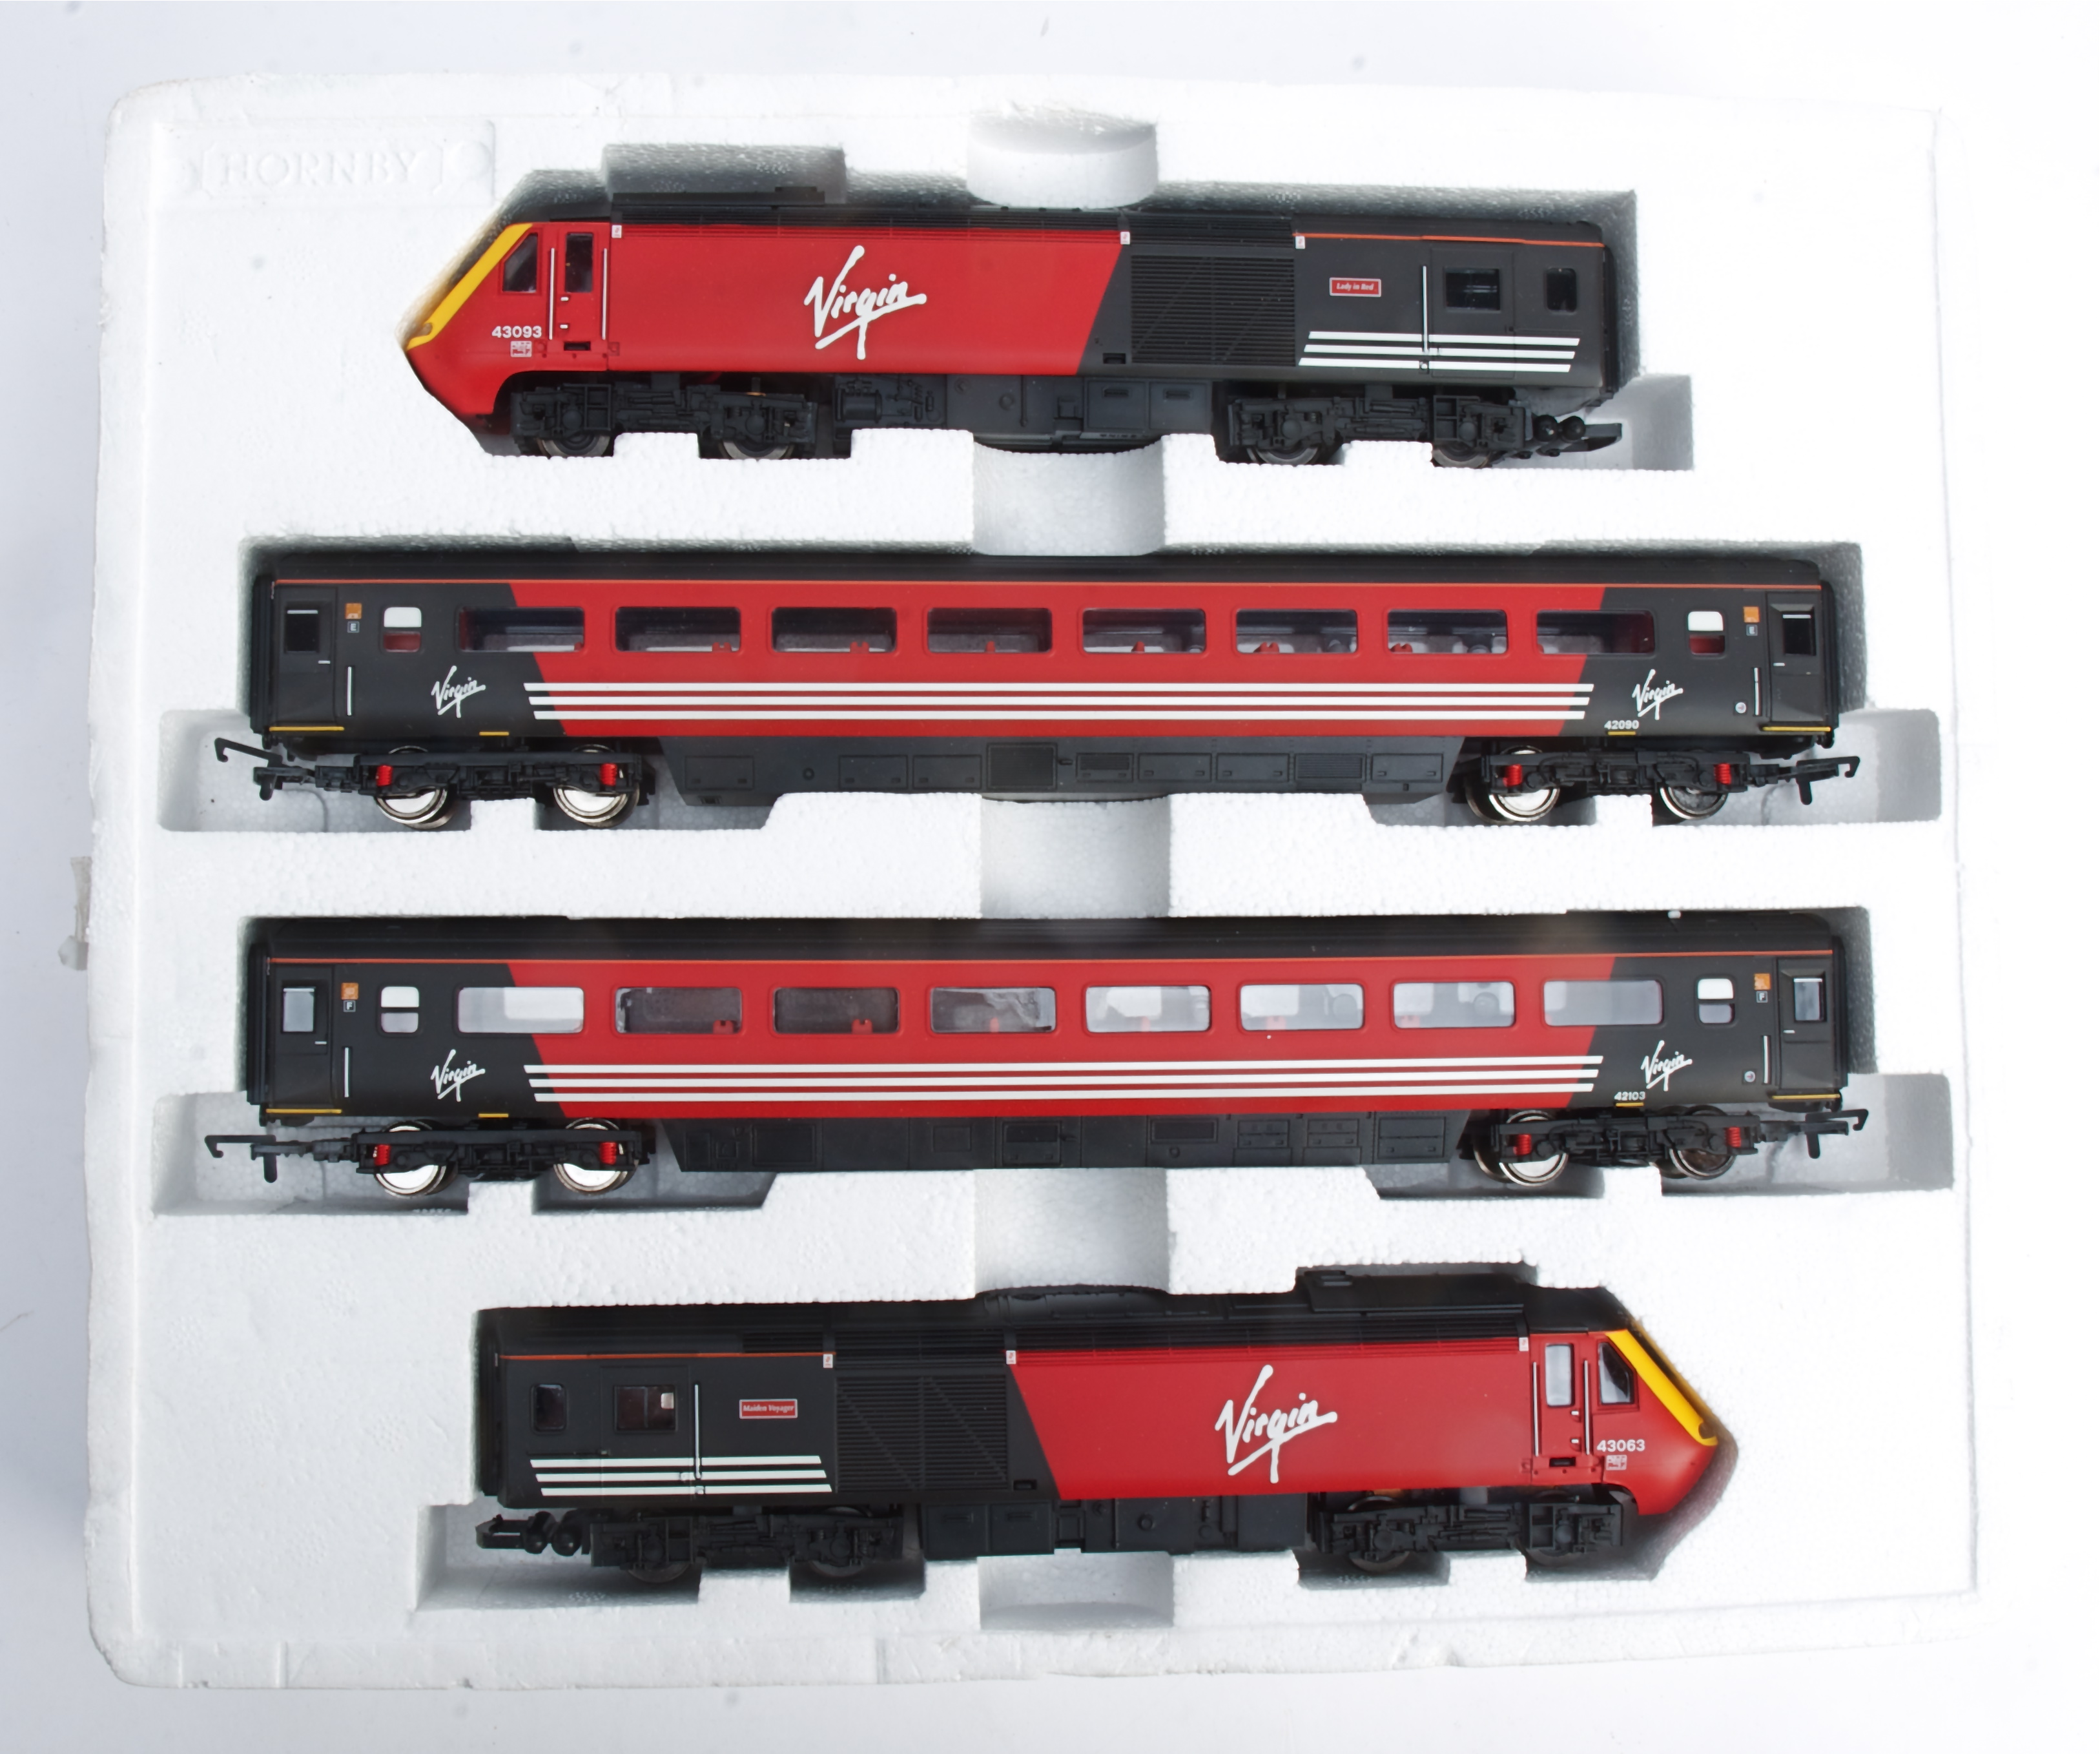 Hornby 00 Gauge Virgin HST Lady in Red and Maiden Voyager Train Pack, comprising 4-car set, in